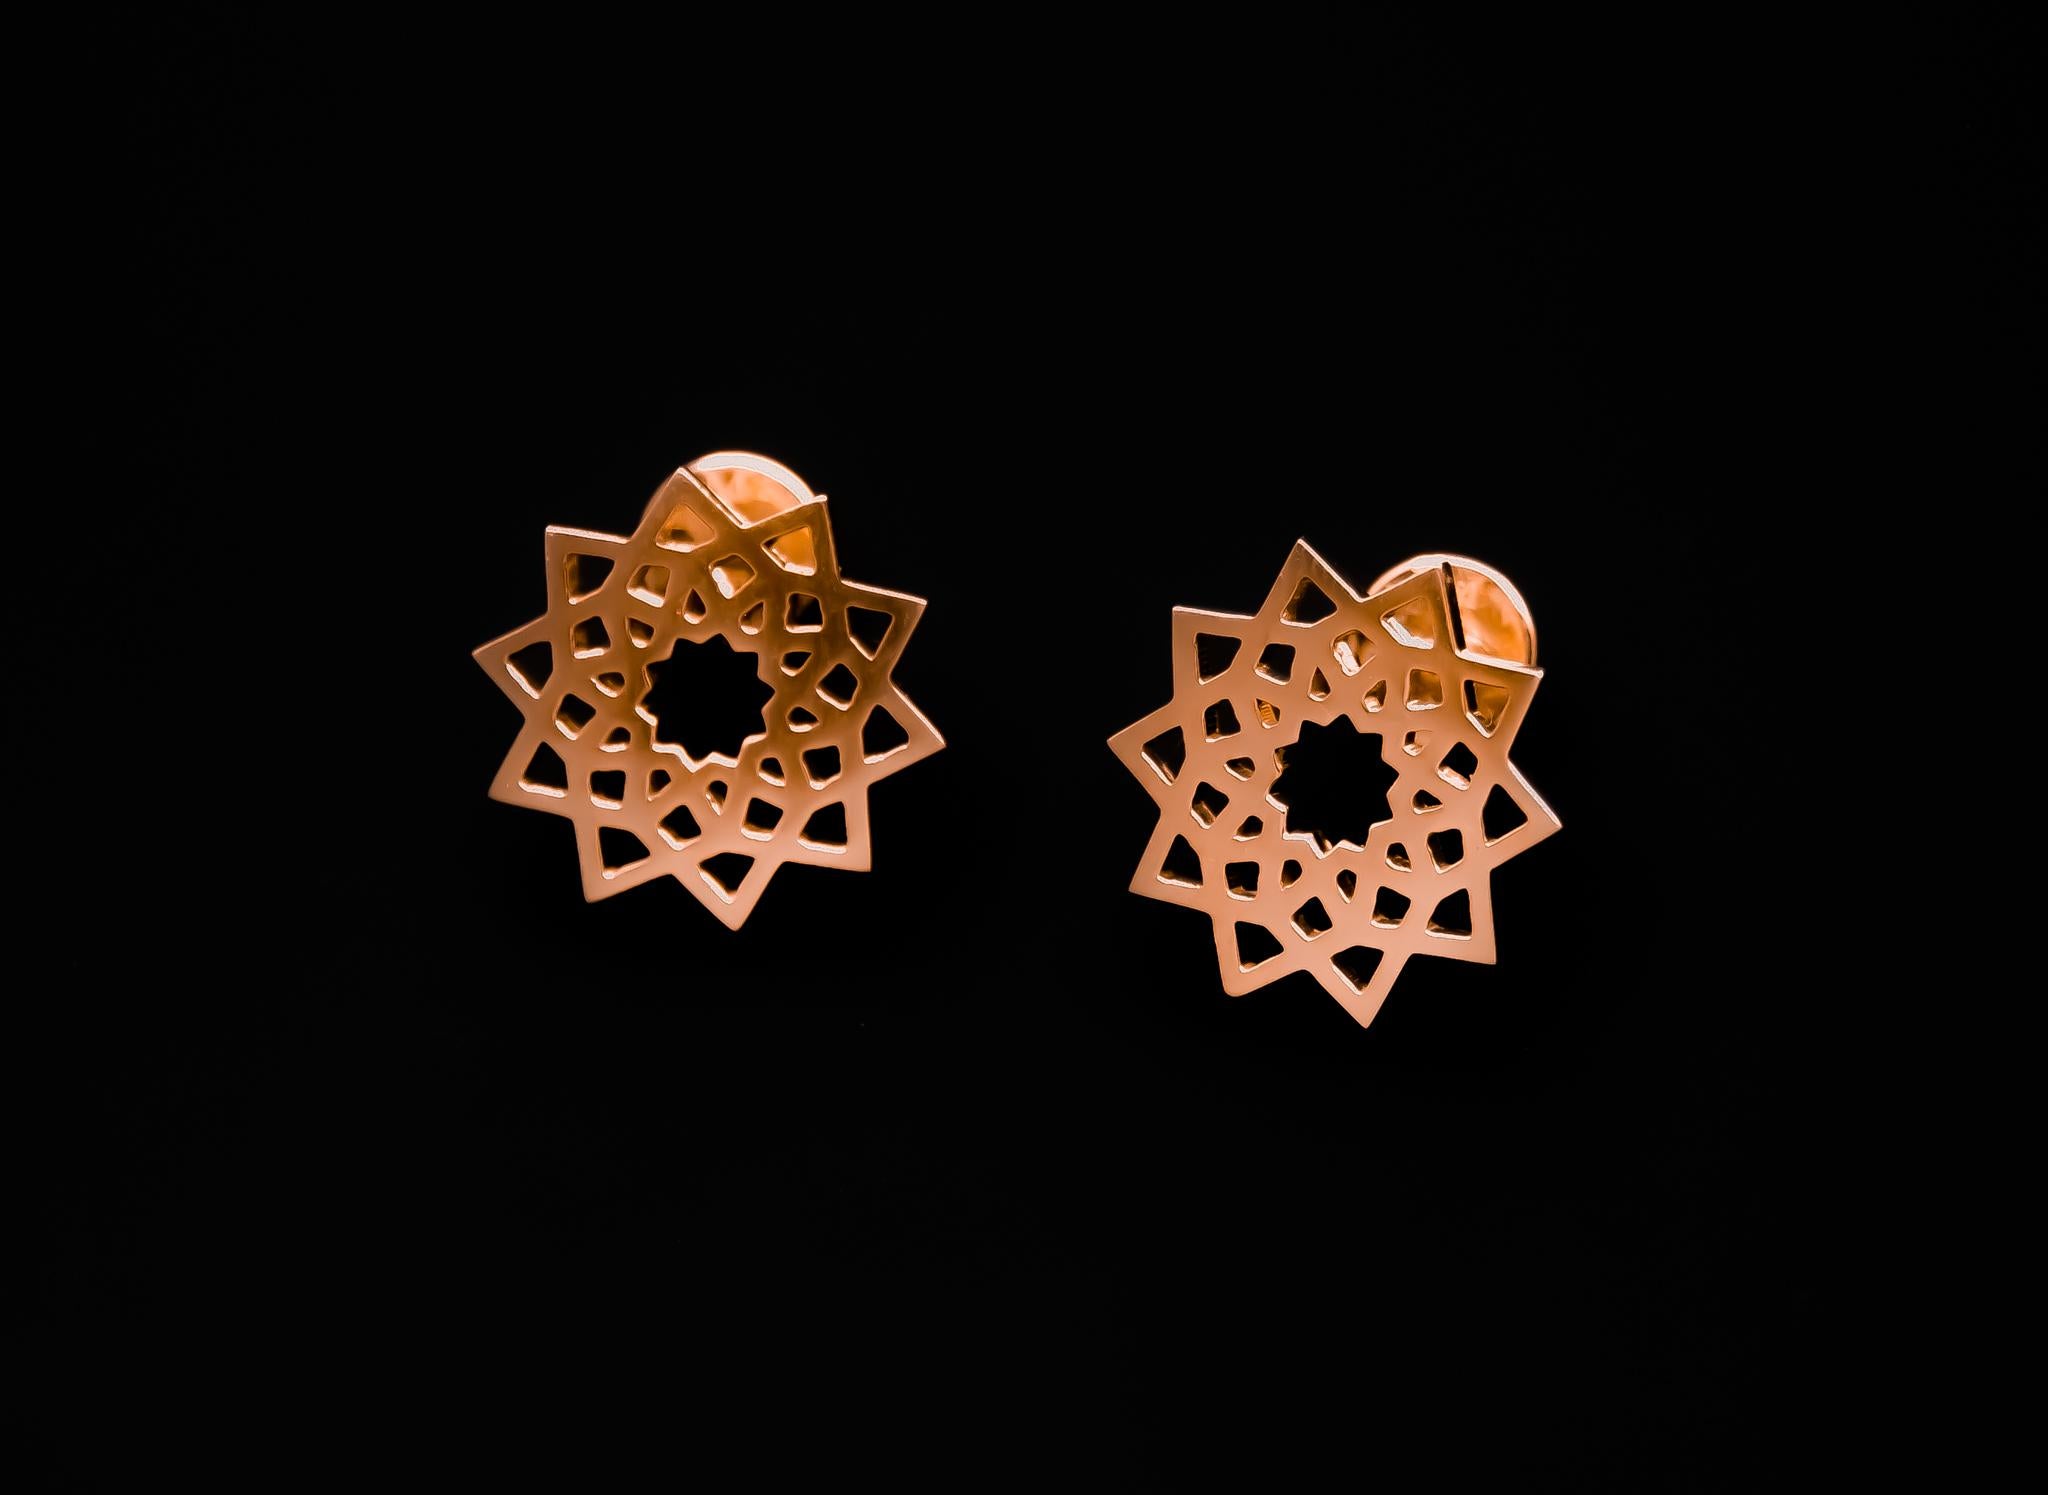 Arabesque Deco Andalusian Style Stud Earrings in 18kt Rose Gold

The design of the earrings is inspired by the Andalusian Style and Motifs found in Al Hambra Palace in Granada in Spain